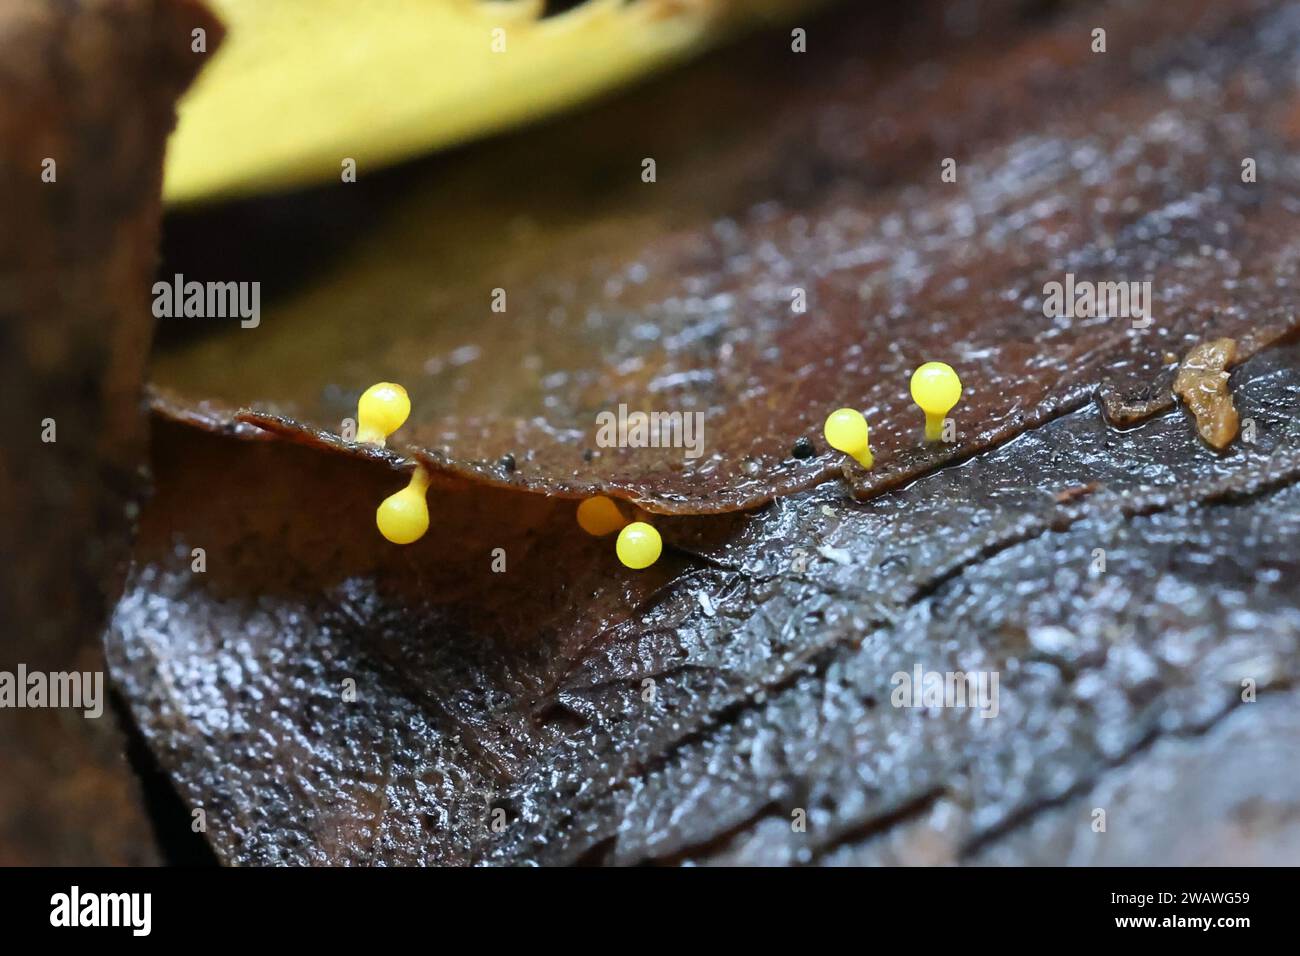 Craterium aureum, a slime mold from Finland, no common English name Stock Photo